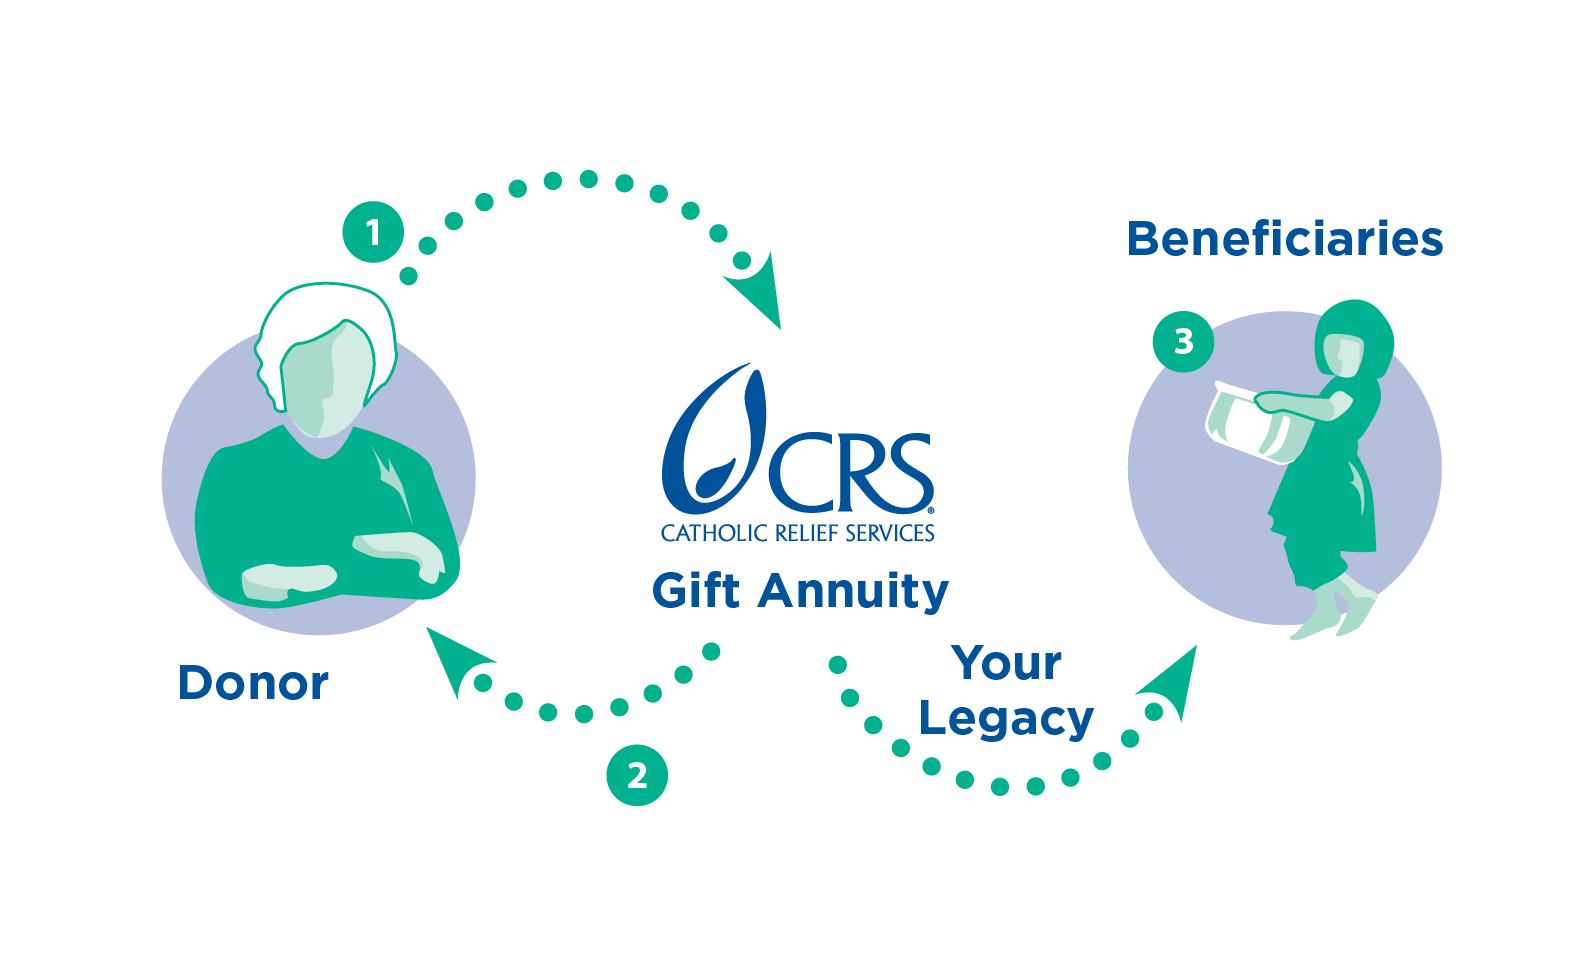 To Make A Charitable Gift That Helps Crs Serve Poor And Vulnerable People Overseas Guarantees Fixed Lifetime Income For You Or Someone